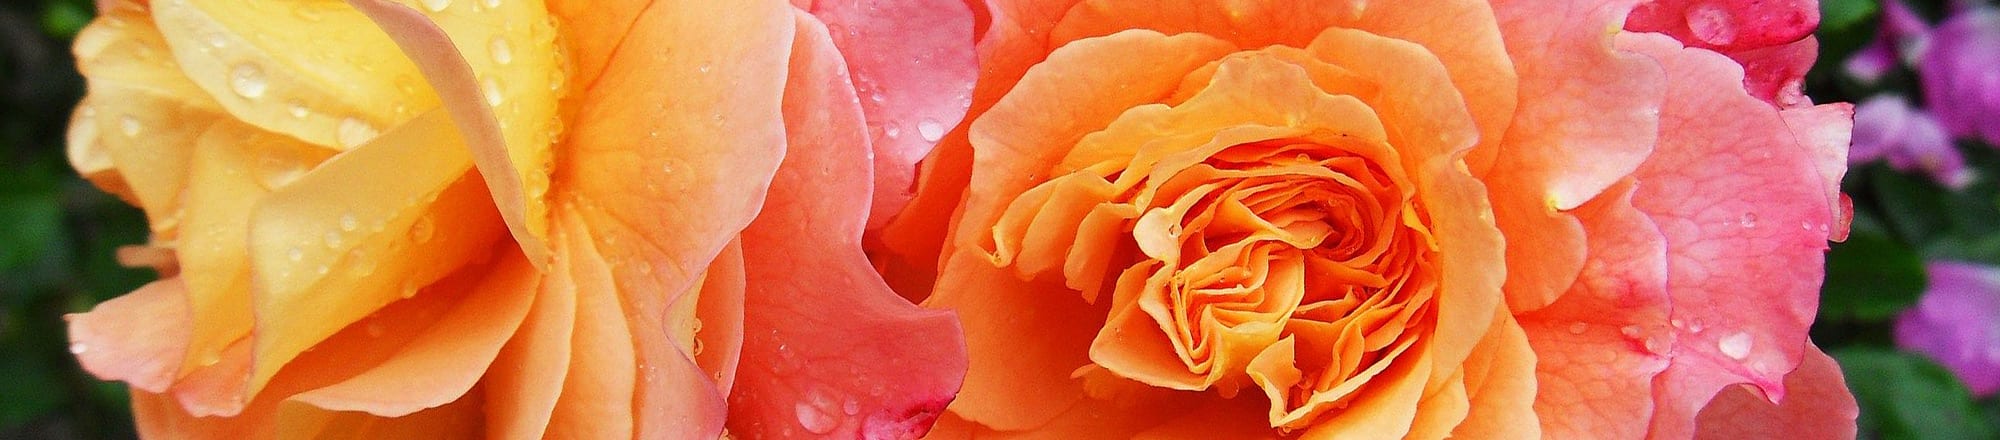 Roses for fragrances and cosmetics